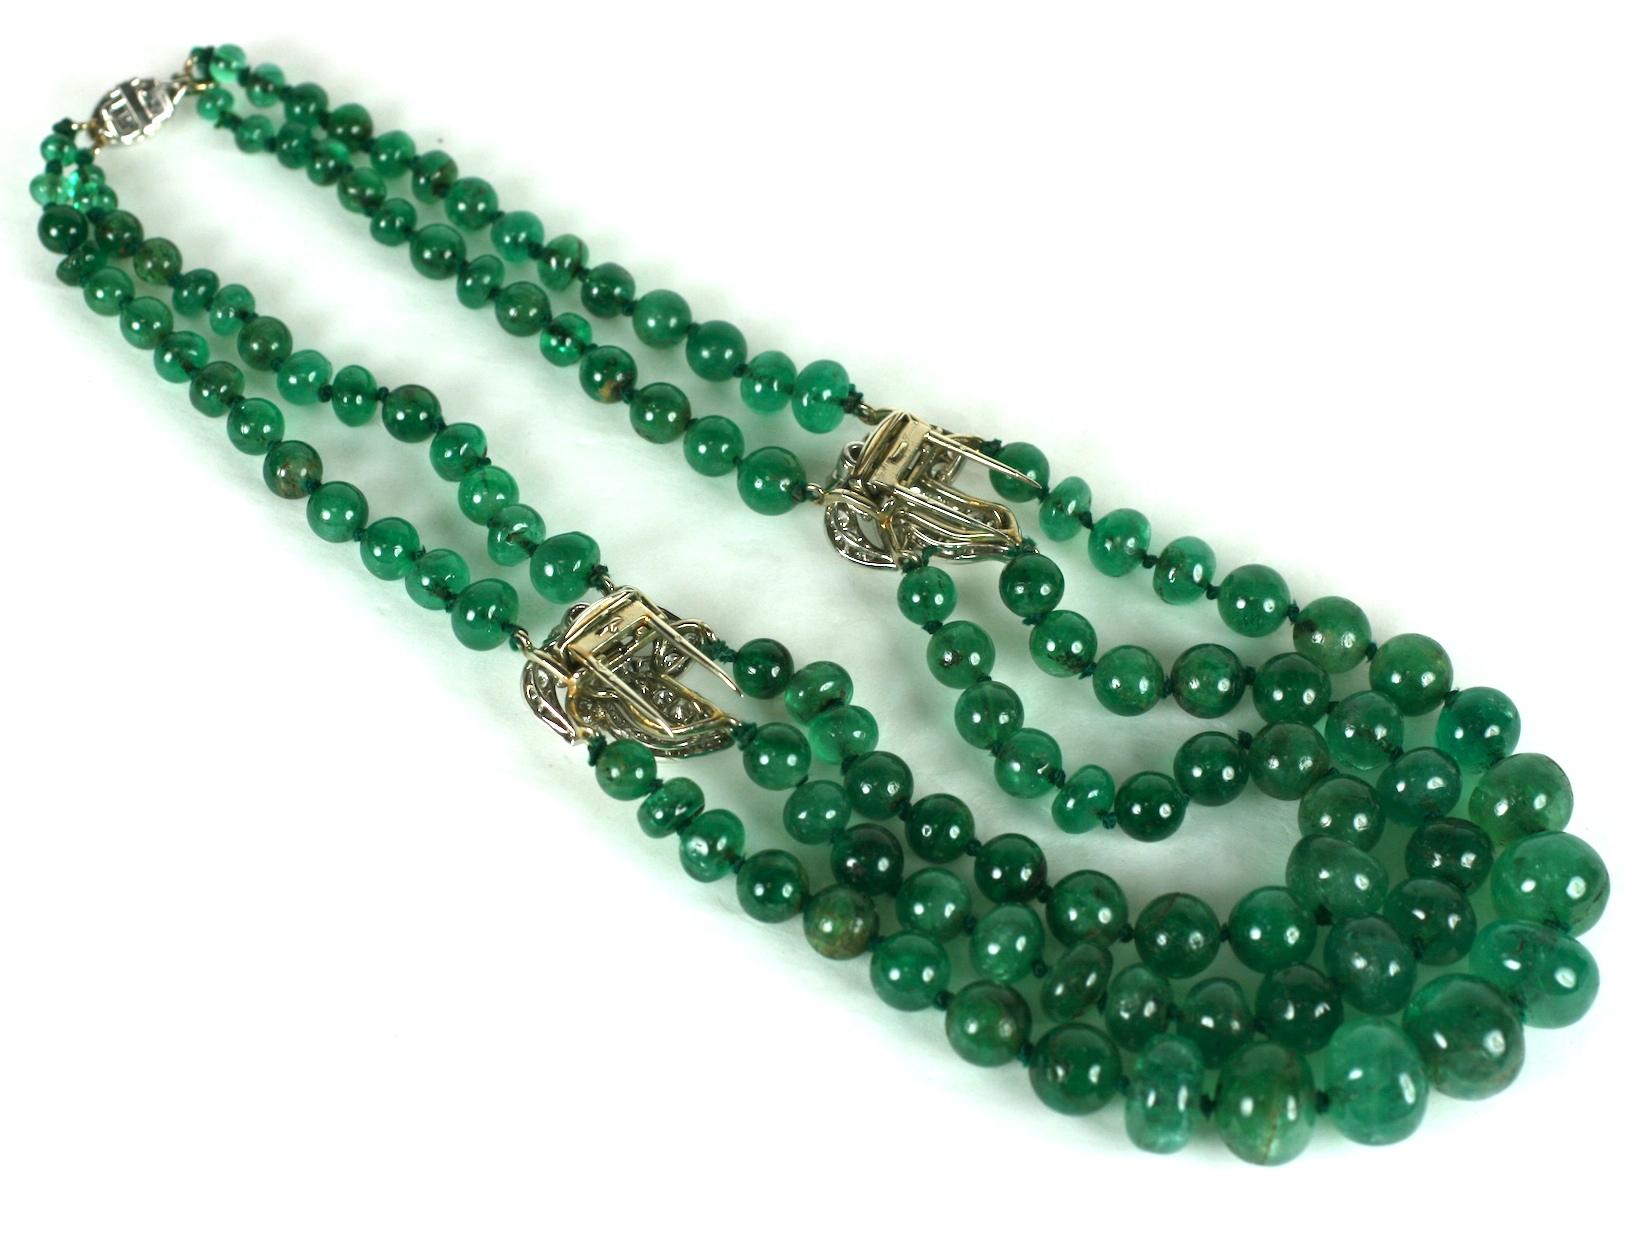 Cartier, Paris Diamond Clip and Emerald Bead Necklace In Excellent Condition For Sale In Riverdale, NY